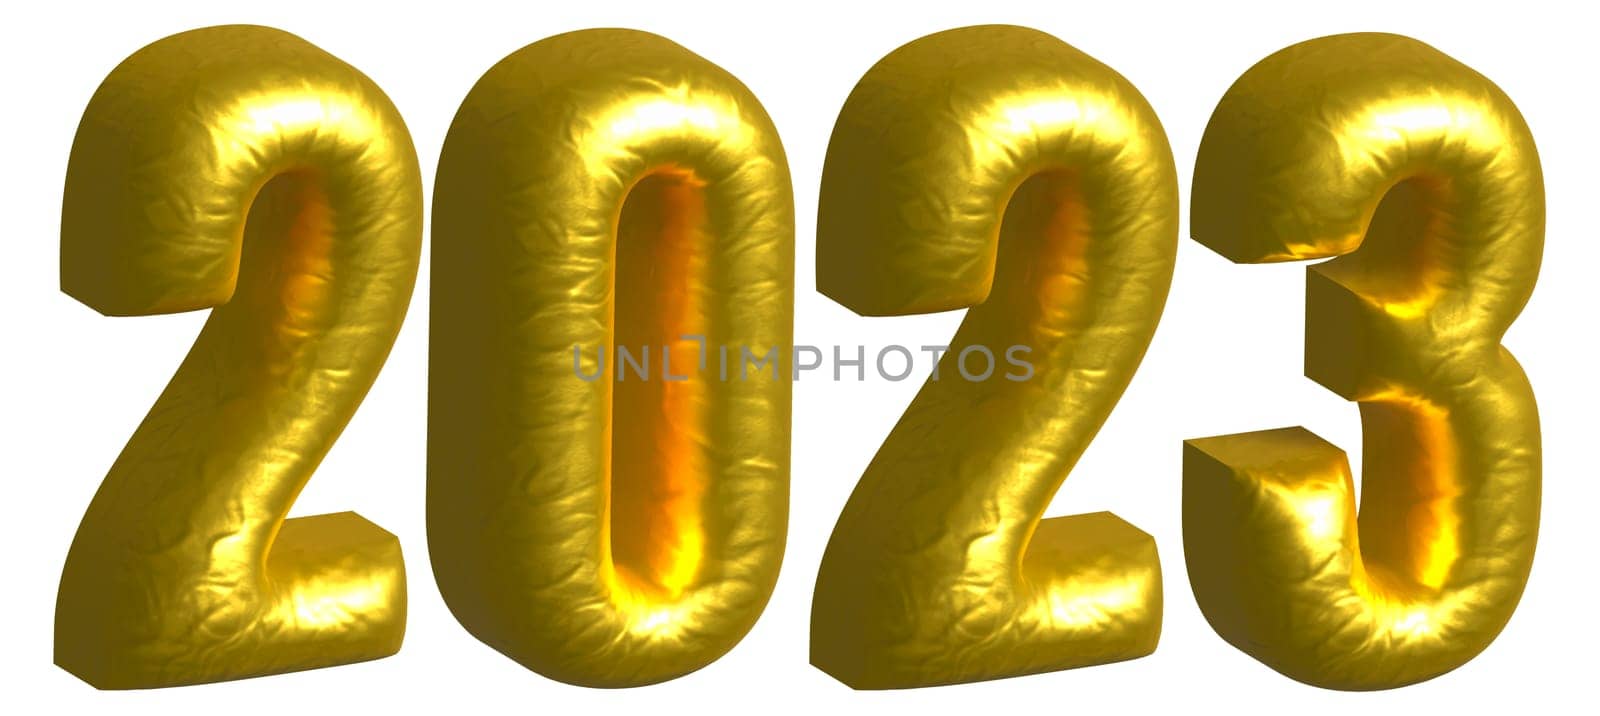 2023 gold leaf fold balloon text by hadkhanong